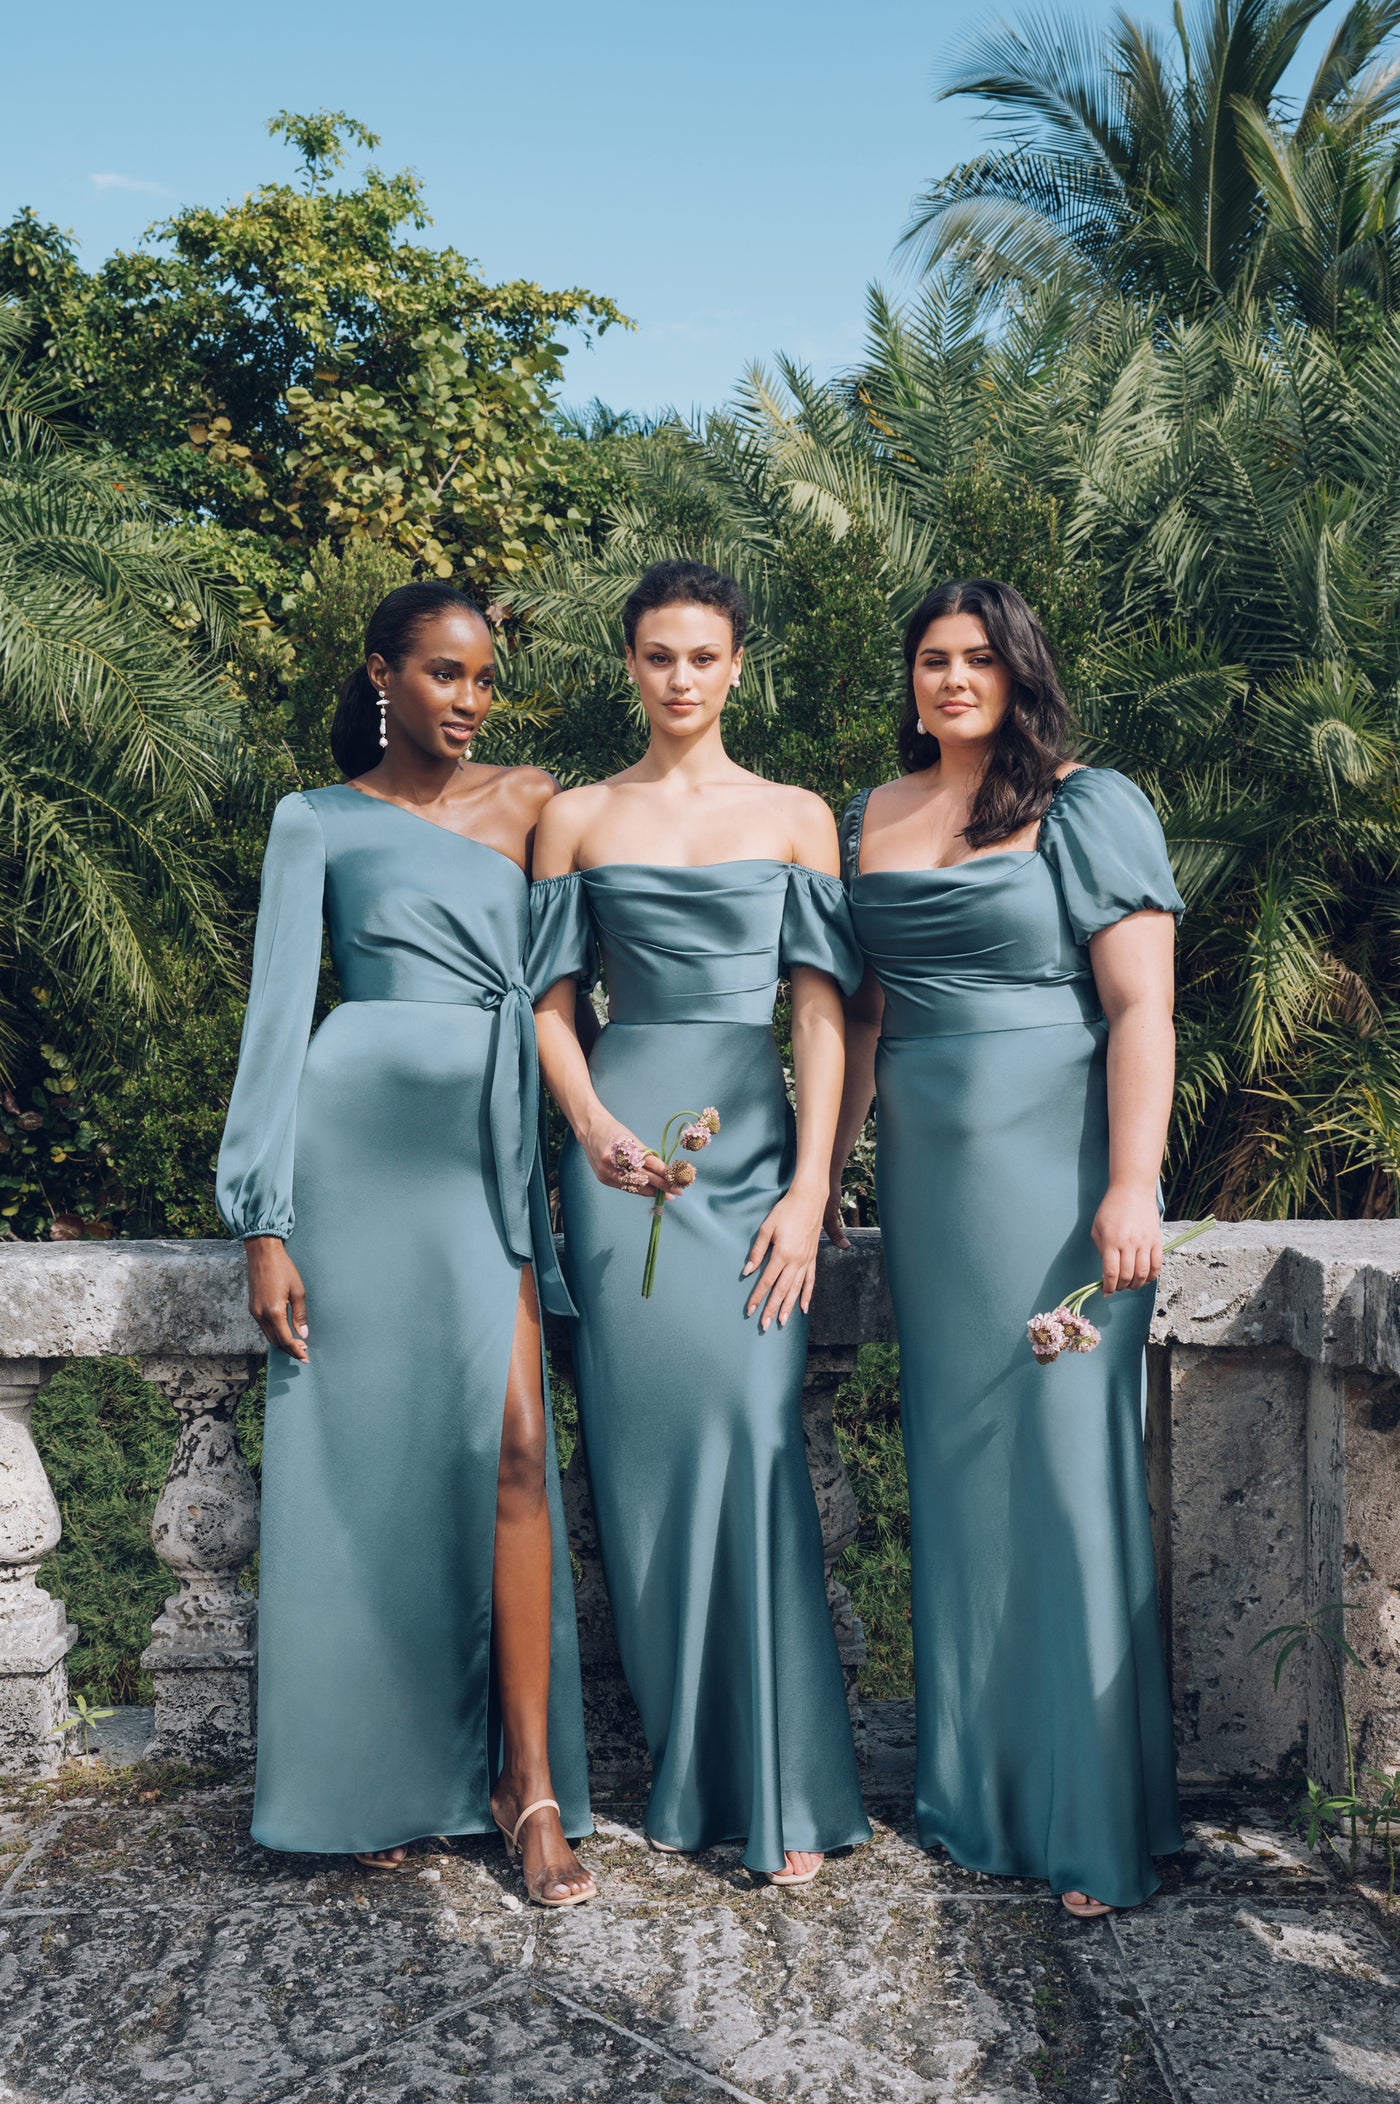 Three women wearing matching Jenny Yoo Bridesmaid Dresses with luxe satin fabric, standing together against a natural backdrop.